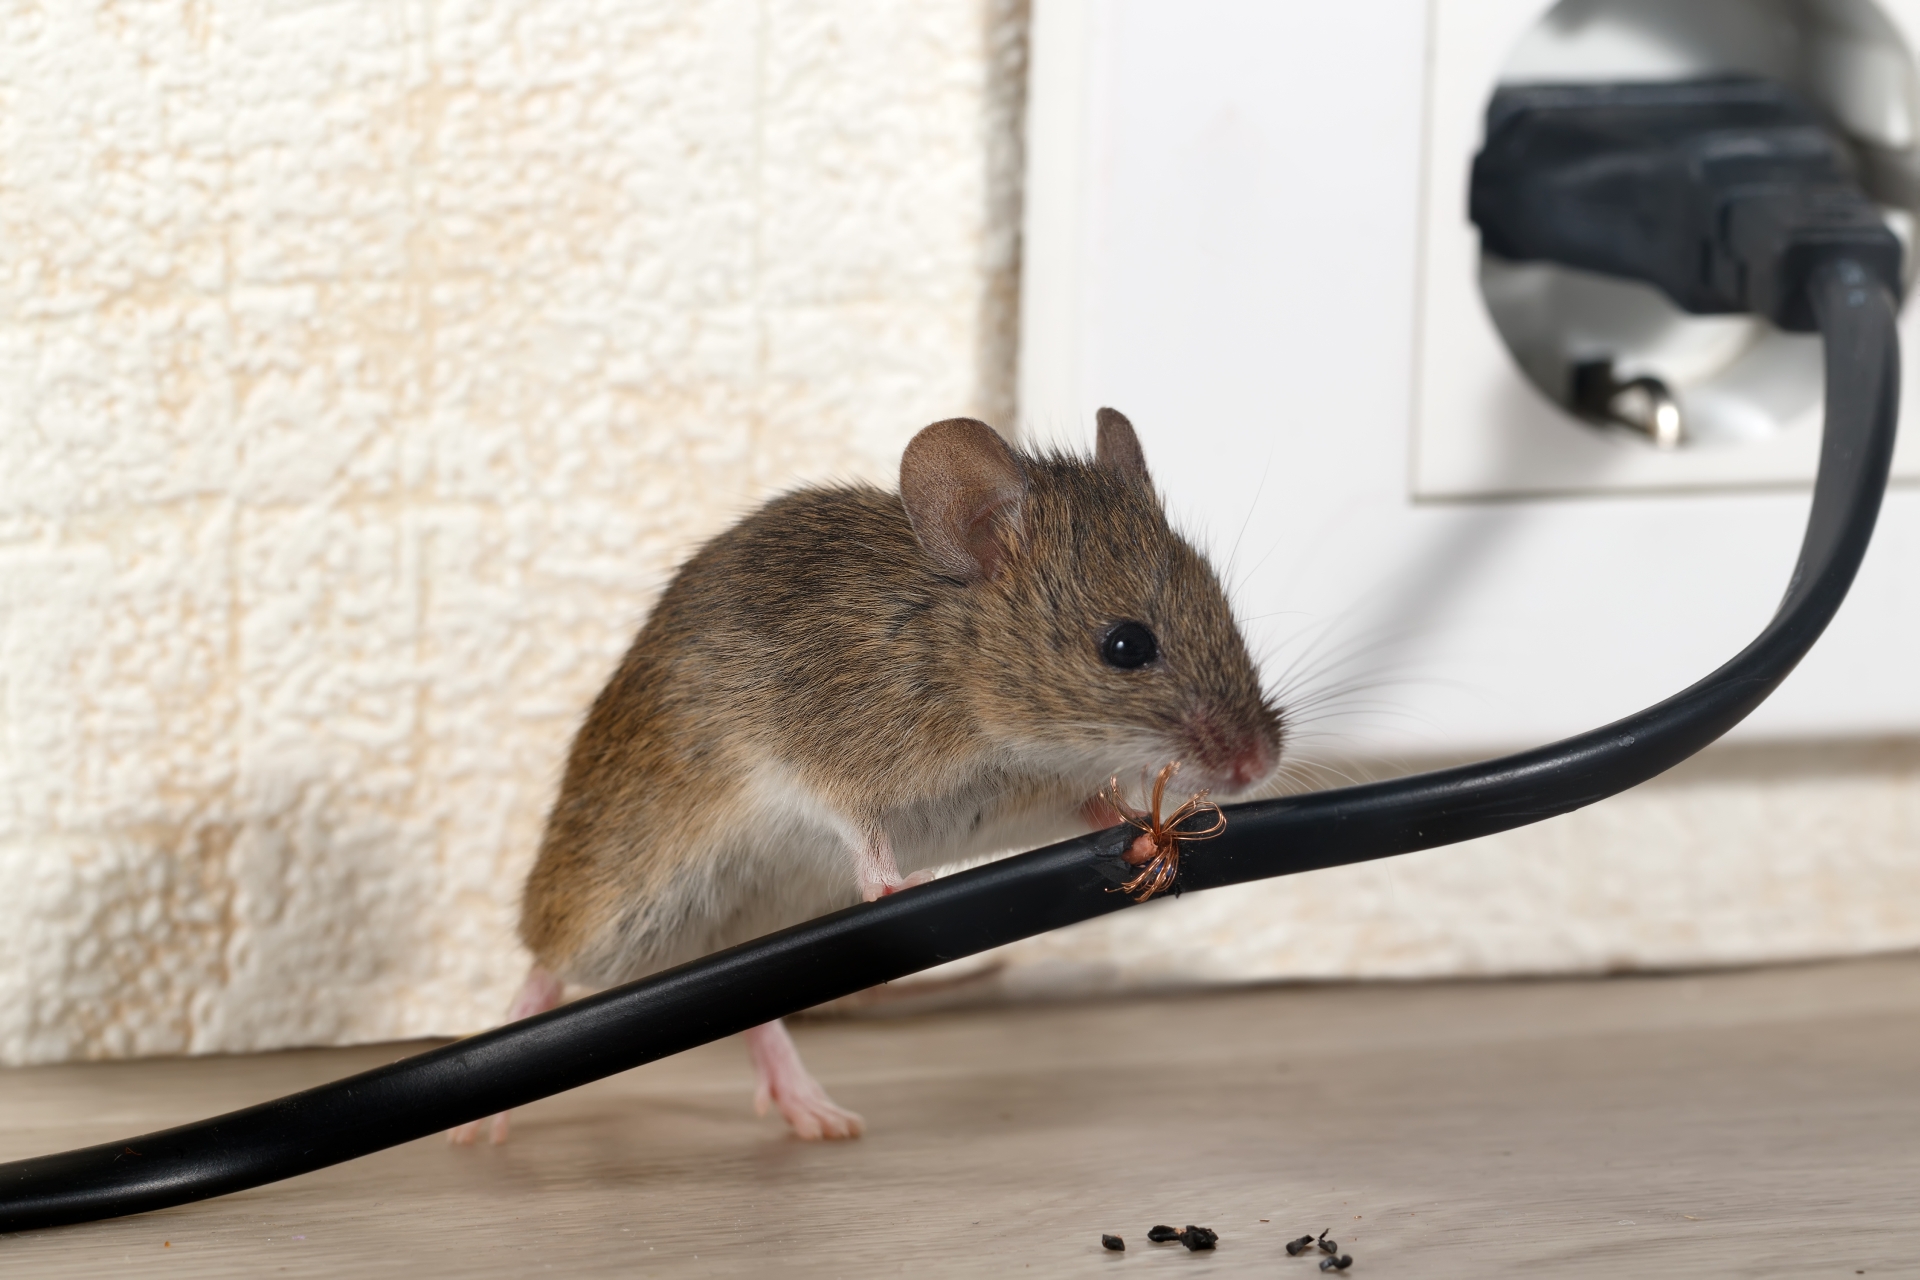 Mice Infestation, Pest Control in Kensington, W8. Call Now 020 8166 9746